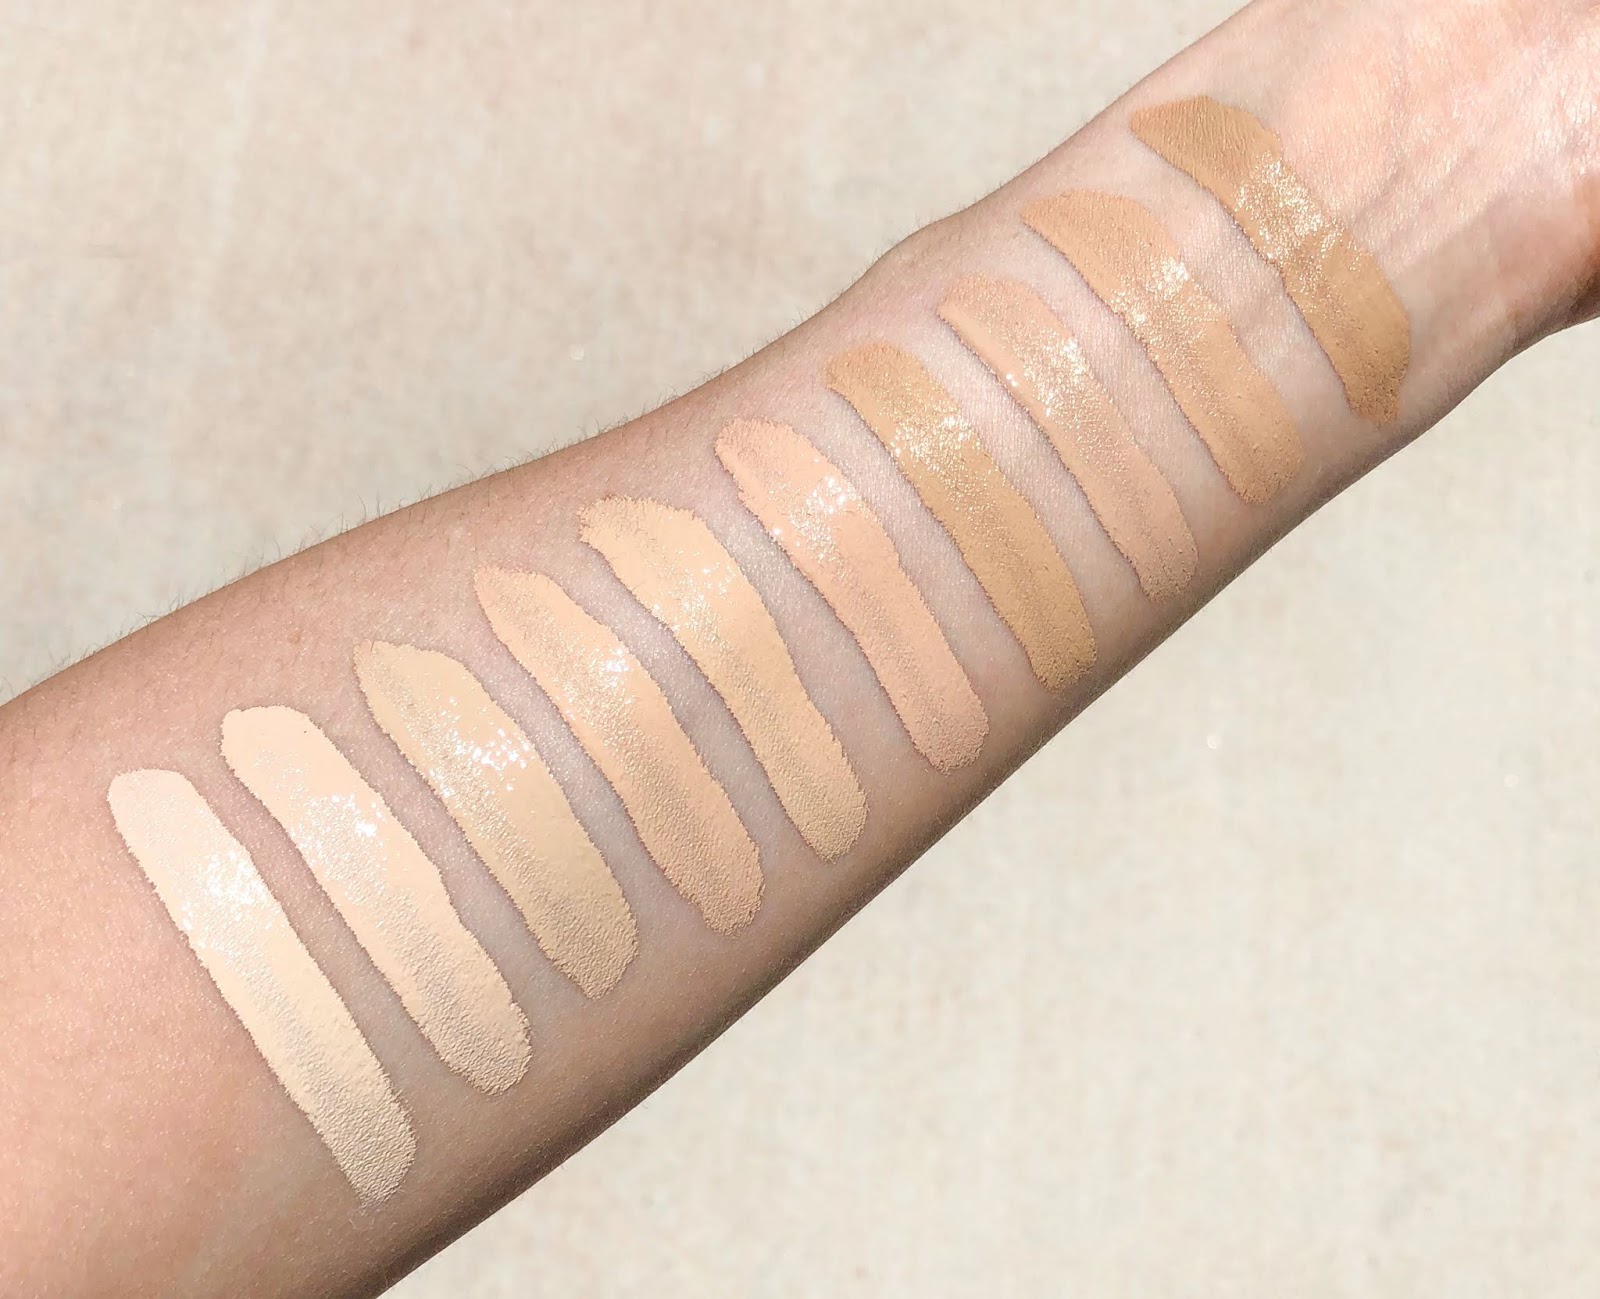 A Concealer That Will Everything: Too Faced Born This Way Multi-Use Sculpting Concealer + Swatches of Every Shade - alittlebitetc